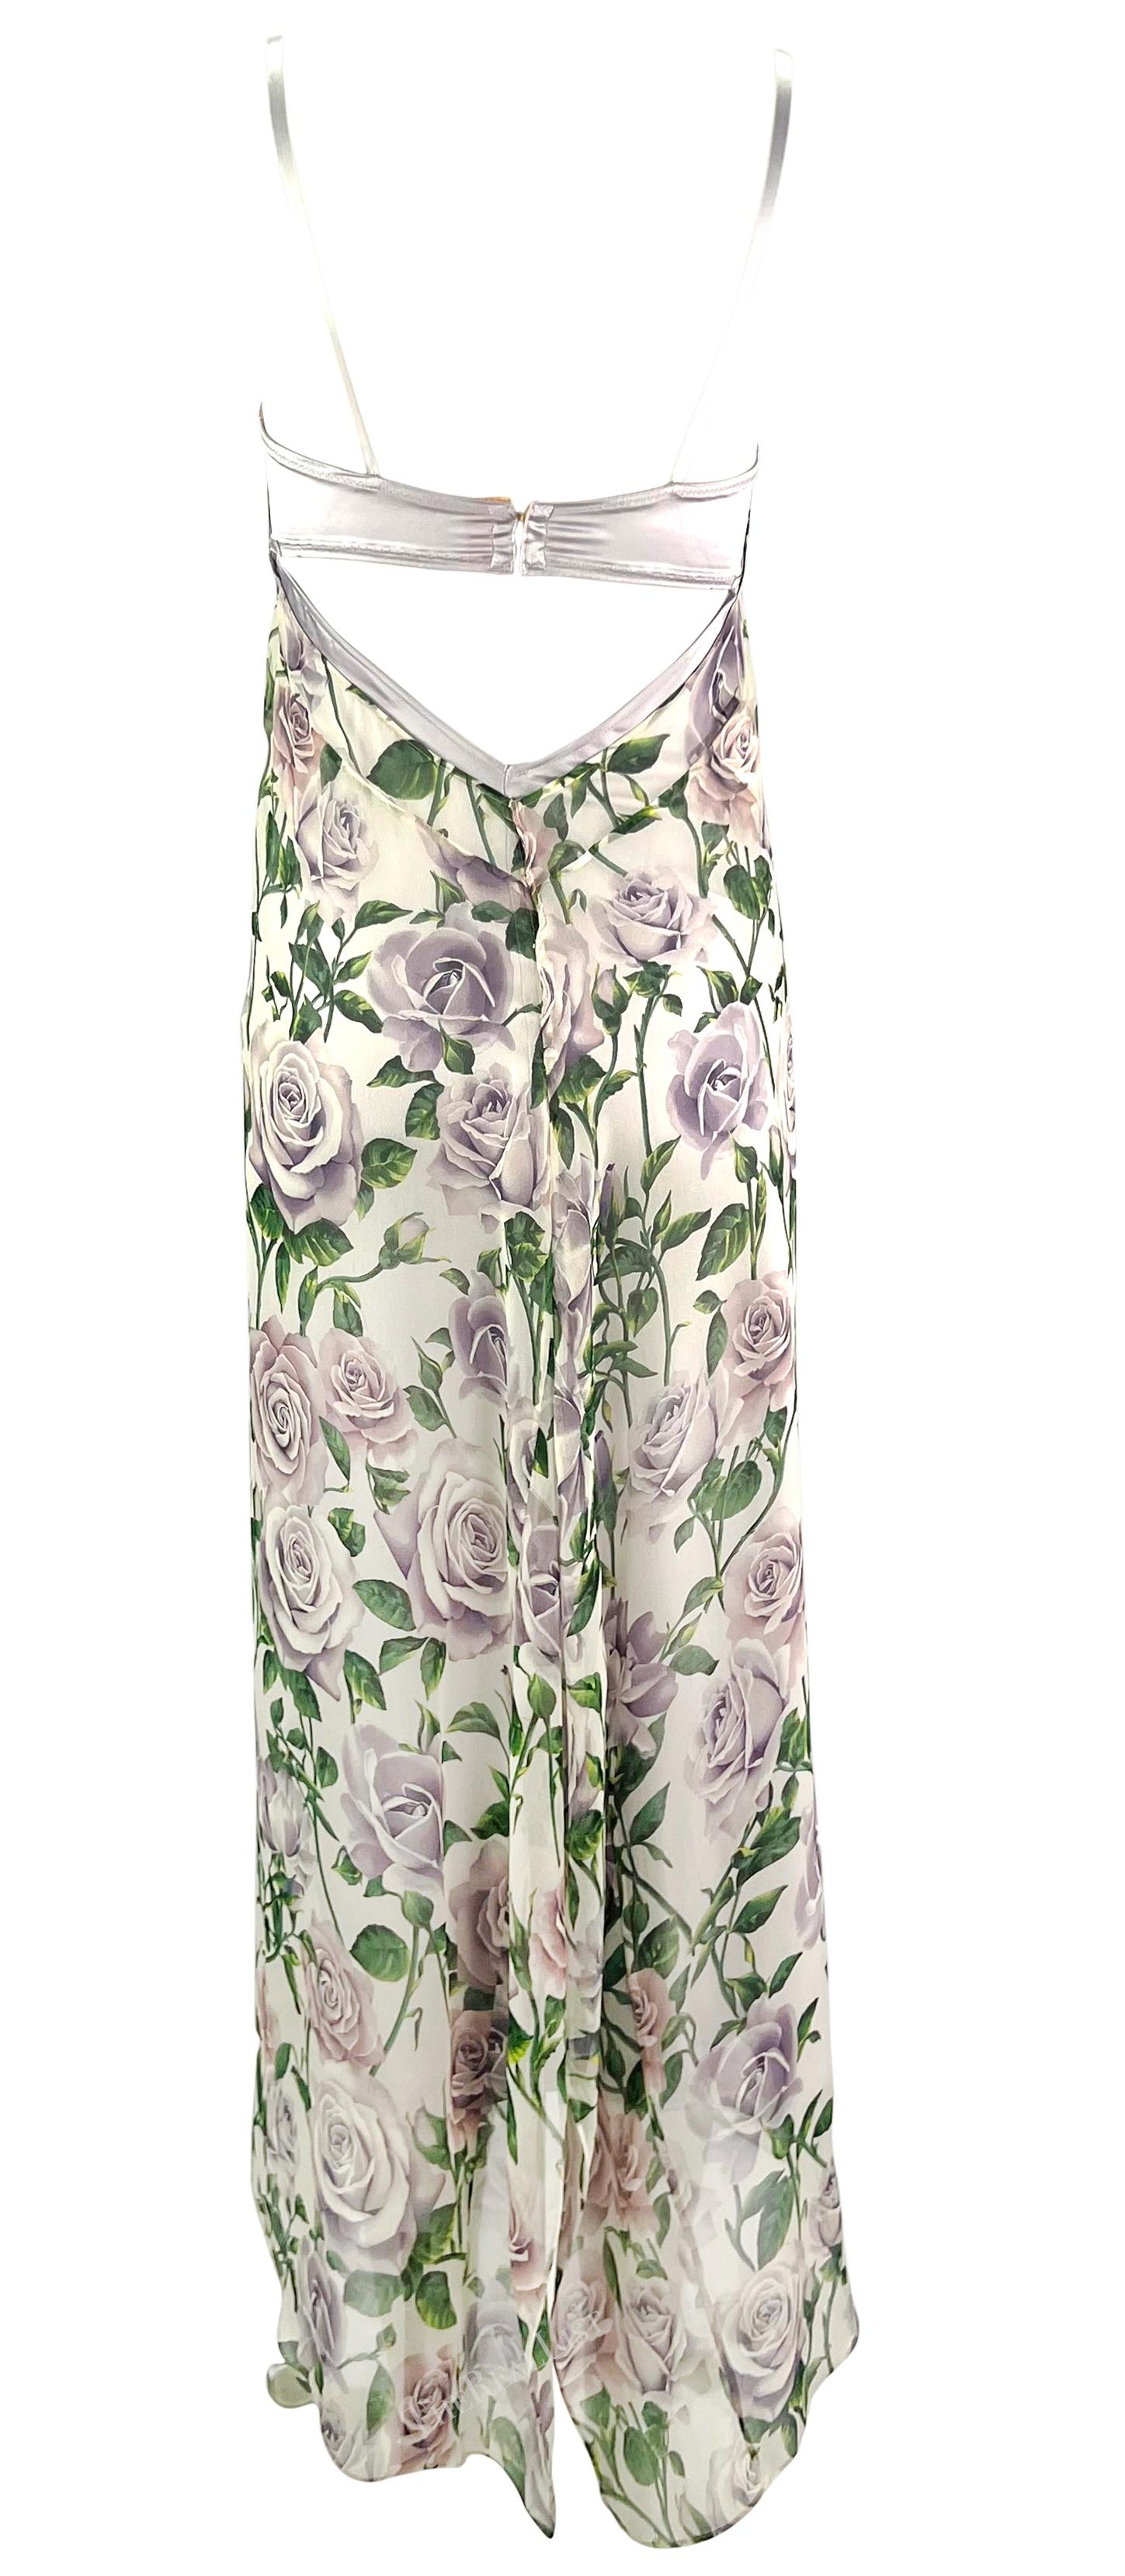 Presenting a beautiful purple rose print Dolce & Gabbana print ankle-length gown. From the early 2000s collection, this gown features Dolce & Gabbana's signature built-in bra design, covered in a lightweight semi-sheer rose print chiffon. The dress